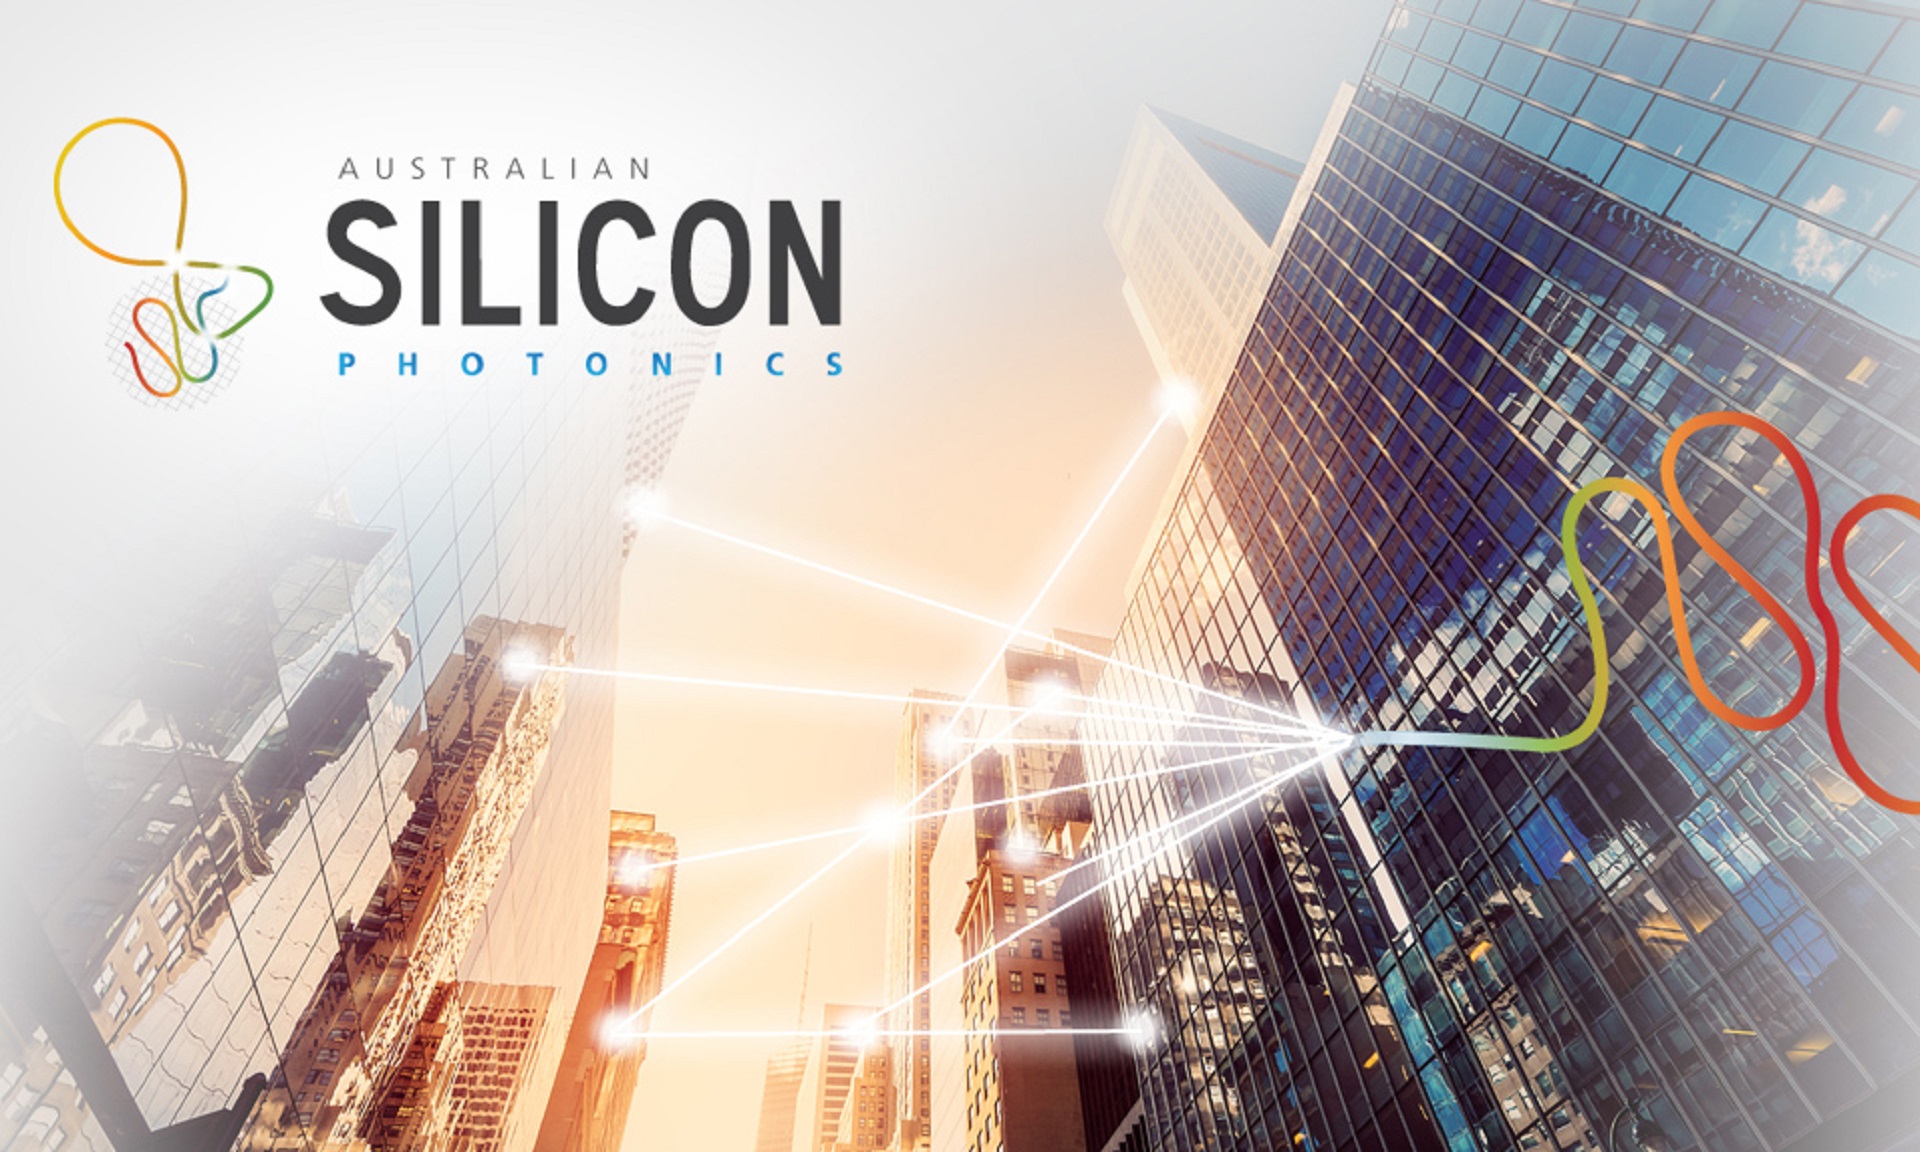 Silicon Photonics is an emerging technology which allows wires connected to silicon chips to be replaced by optical fibres. 